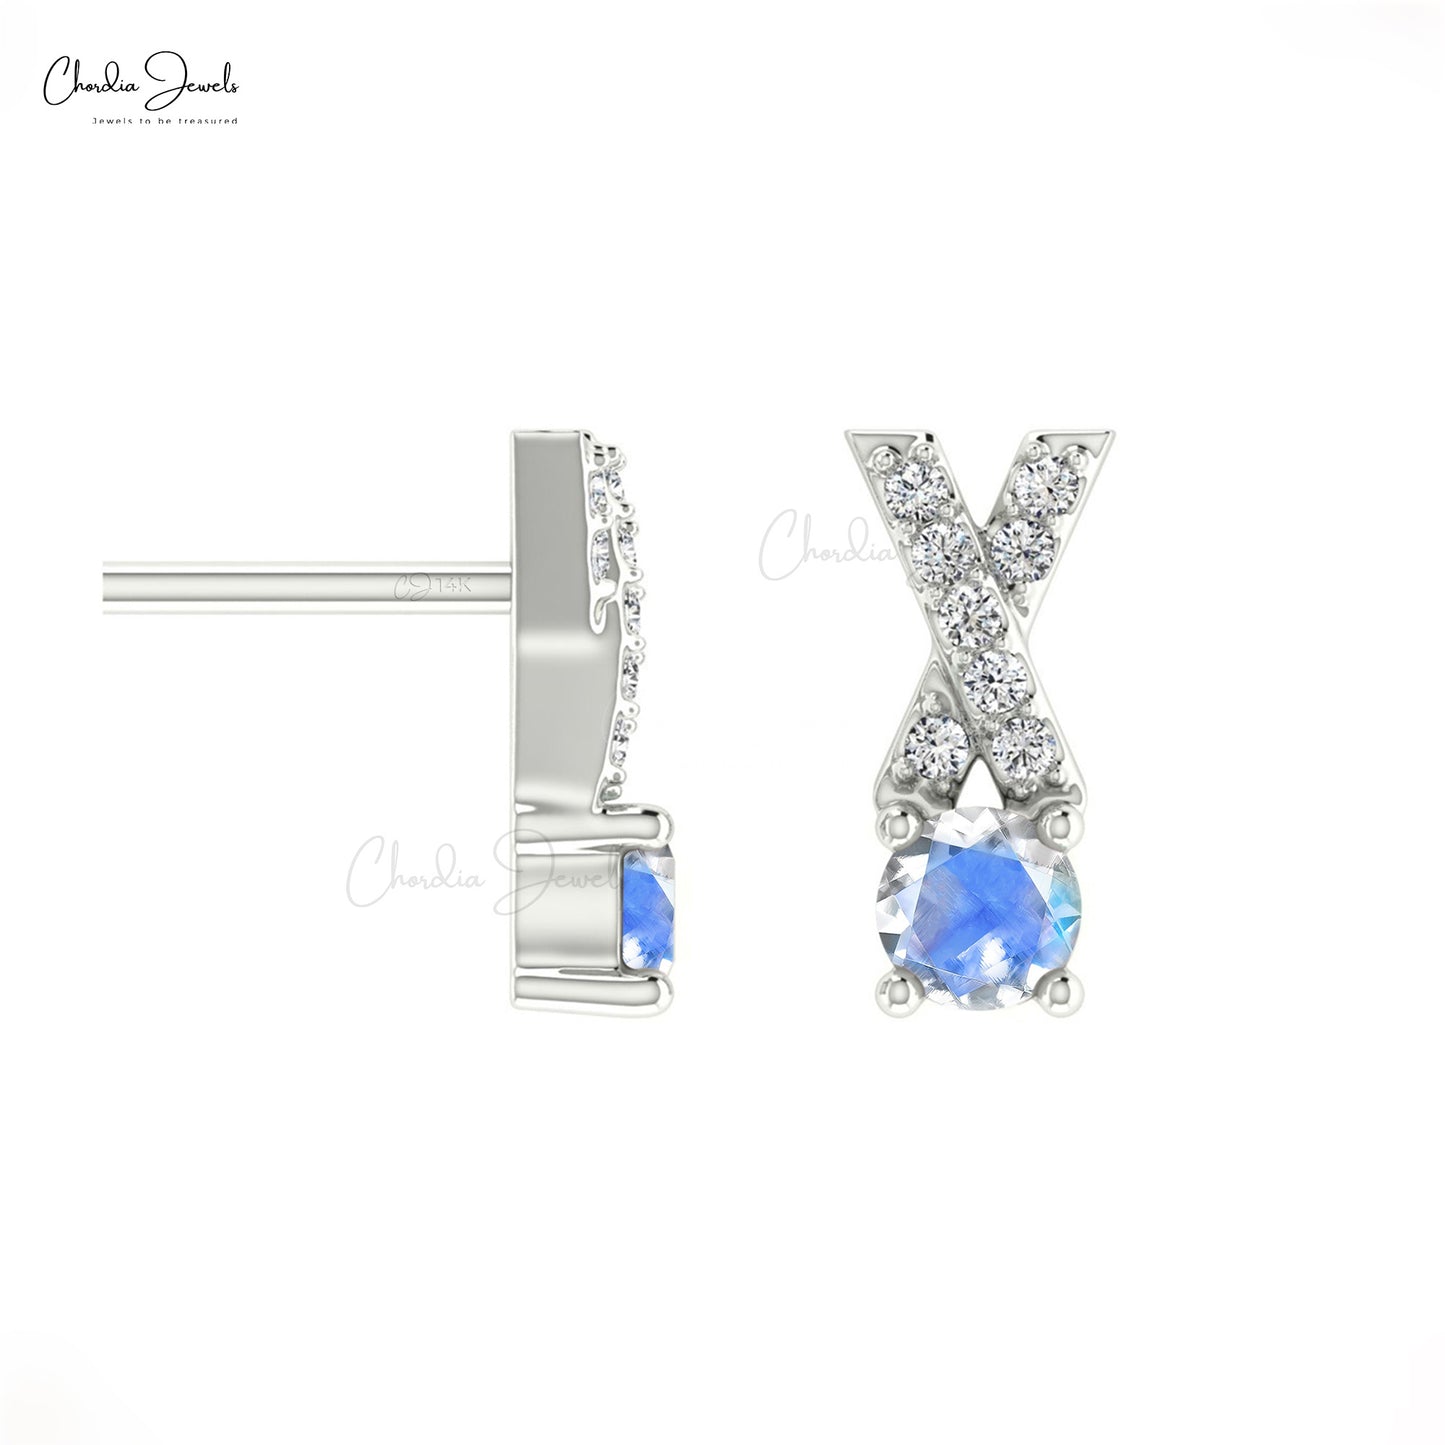 Excellent Prong Set Rainbow Moonstone 14K Gold Criss Cross Earring with White Diamond